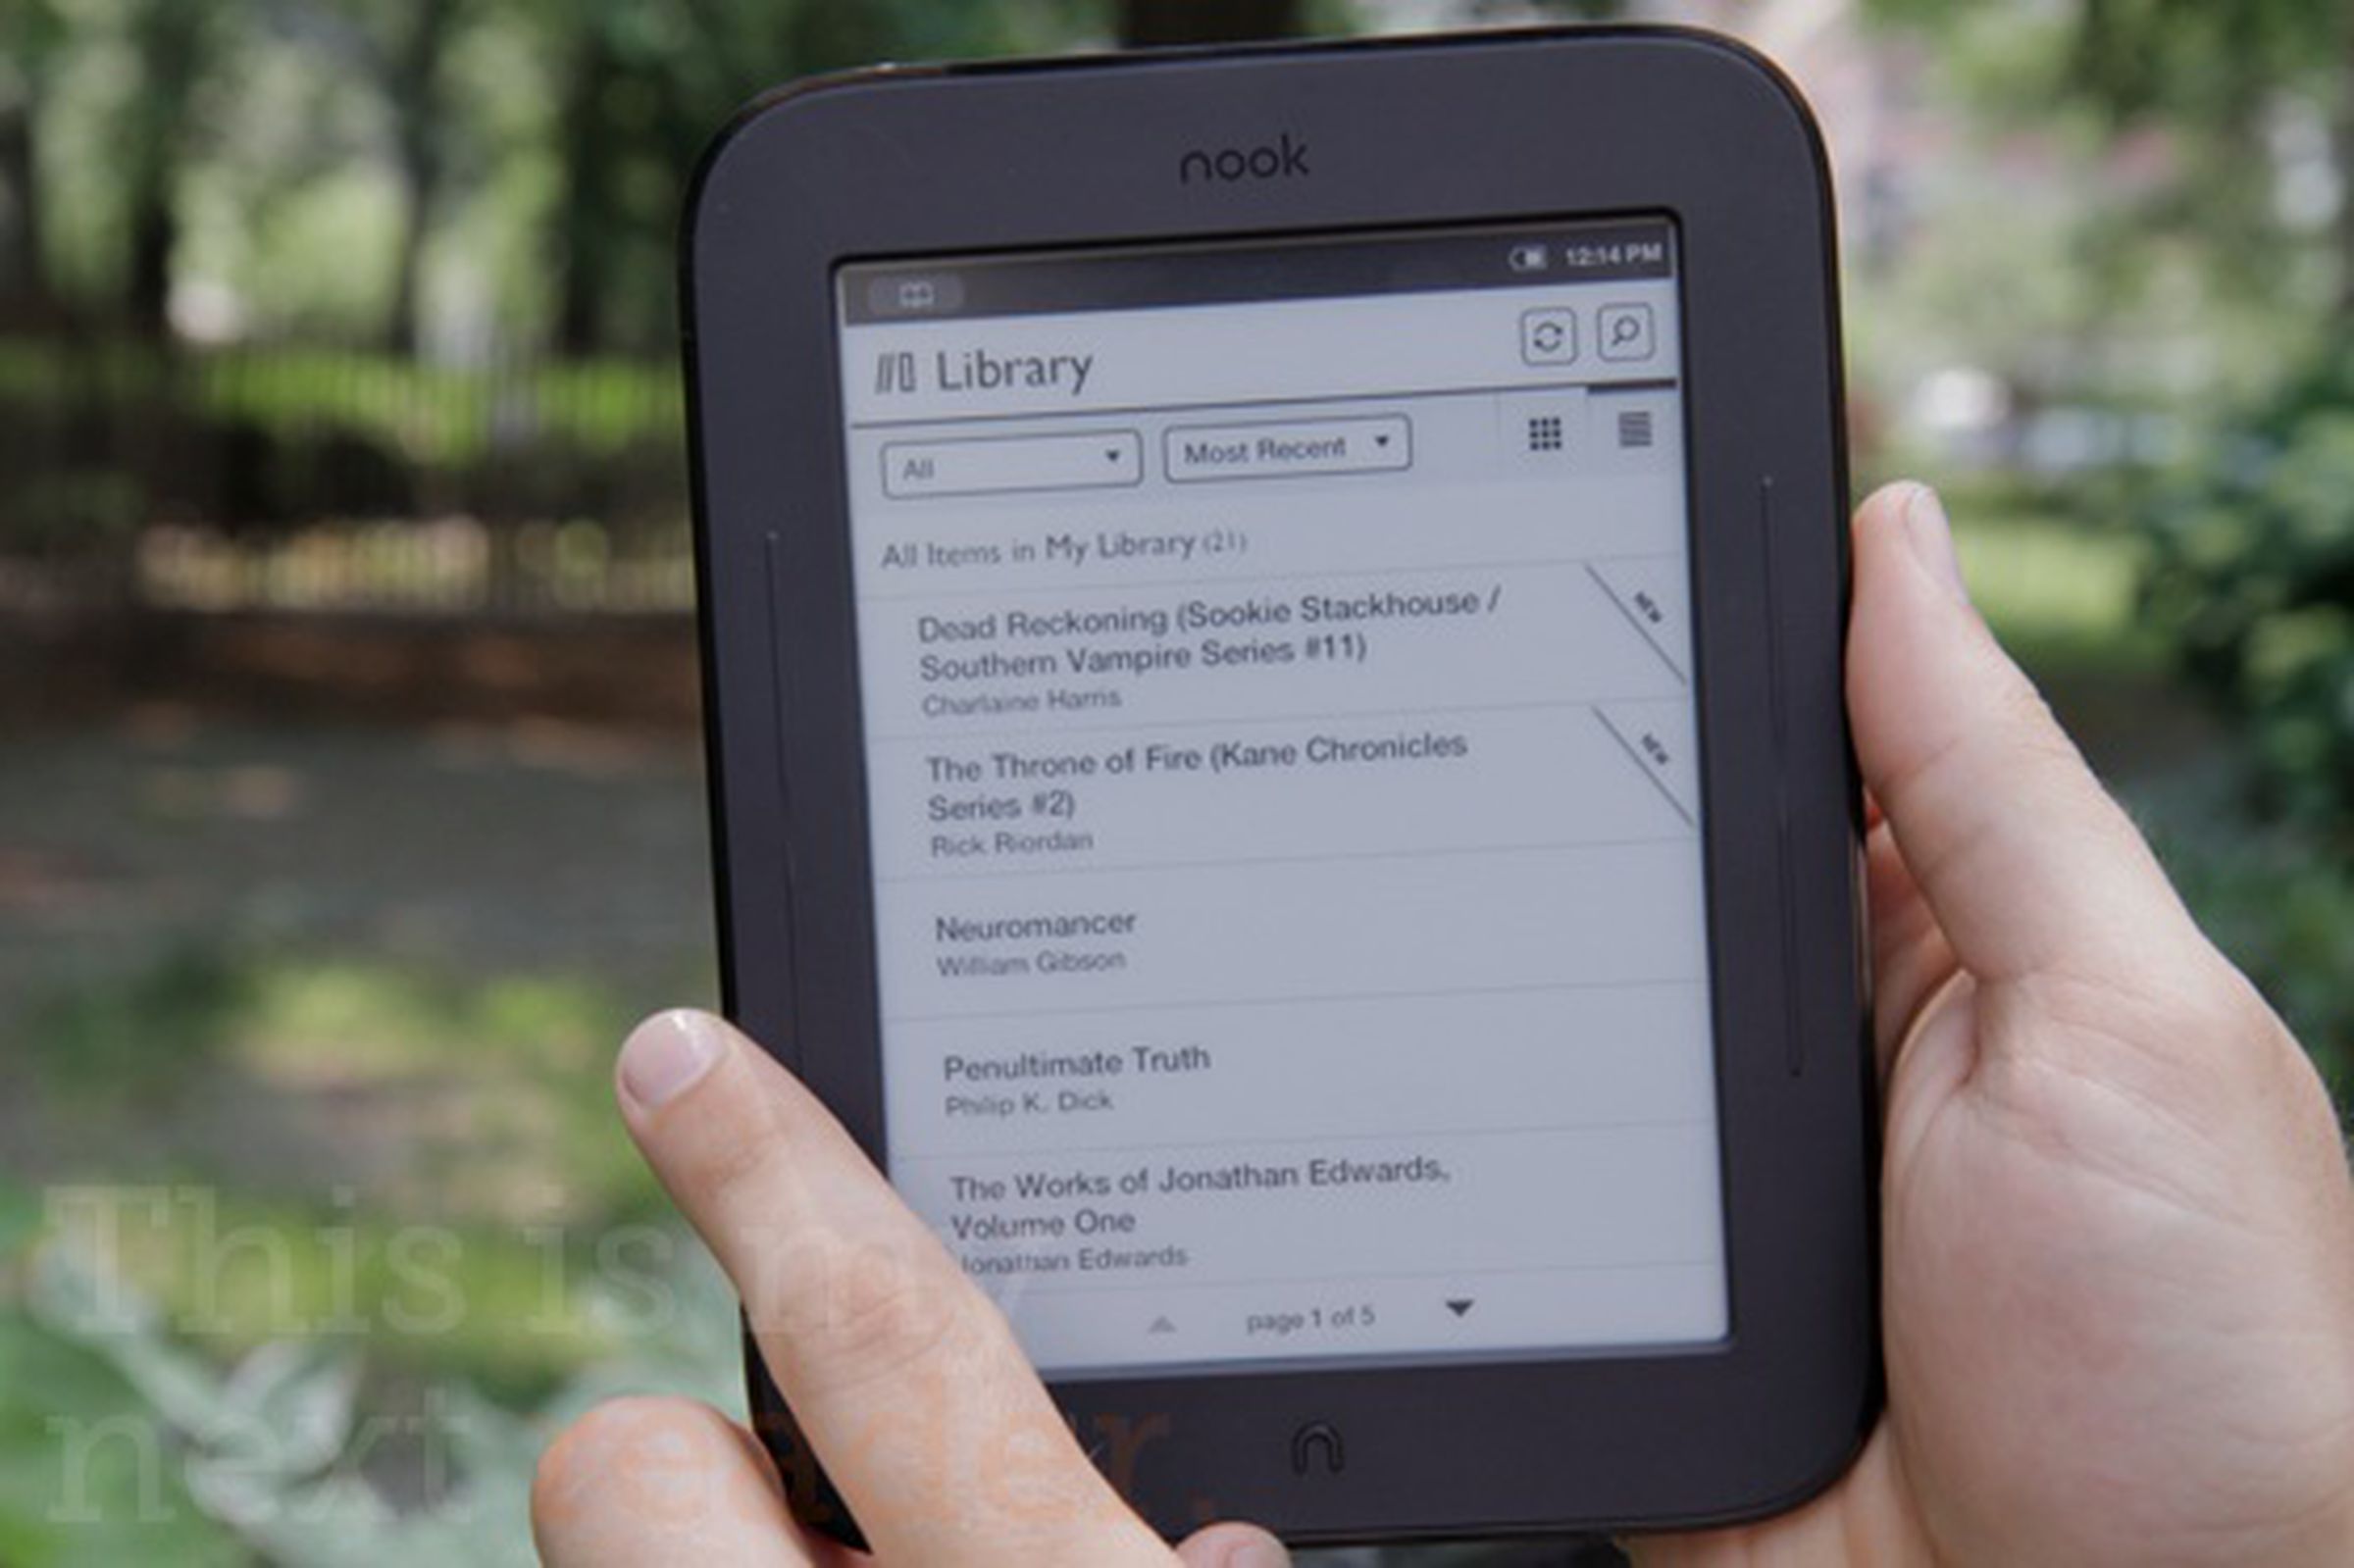 Barnes & Noble Nook review pictures